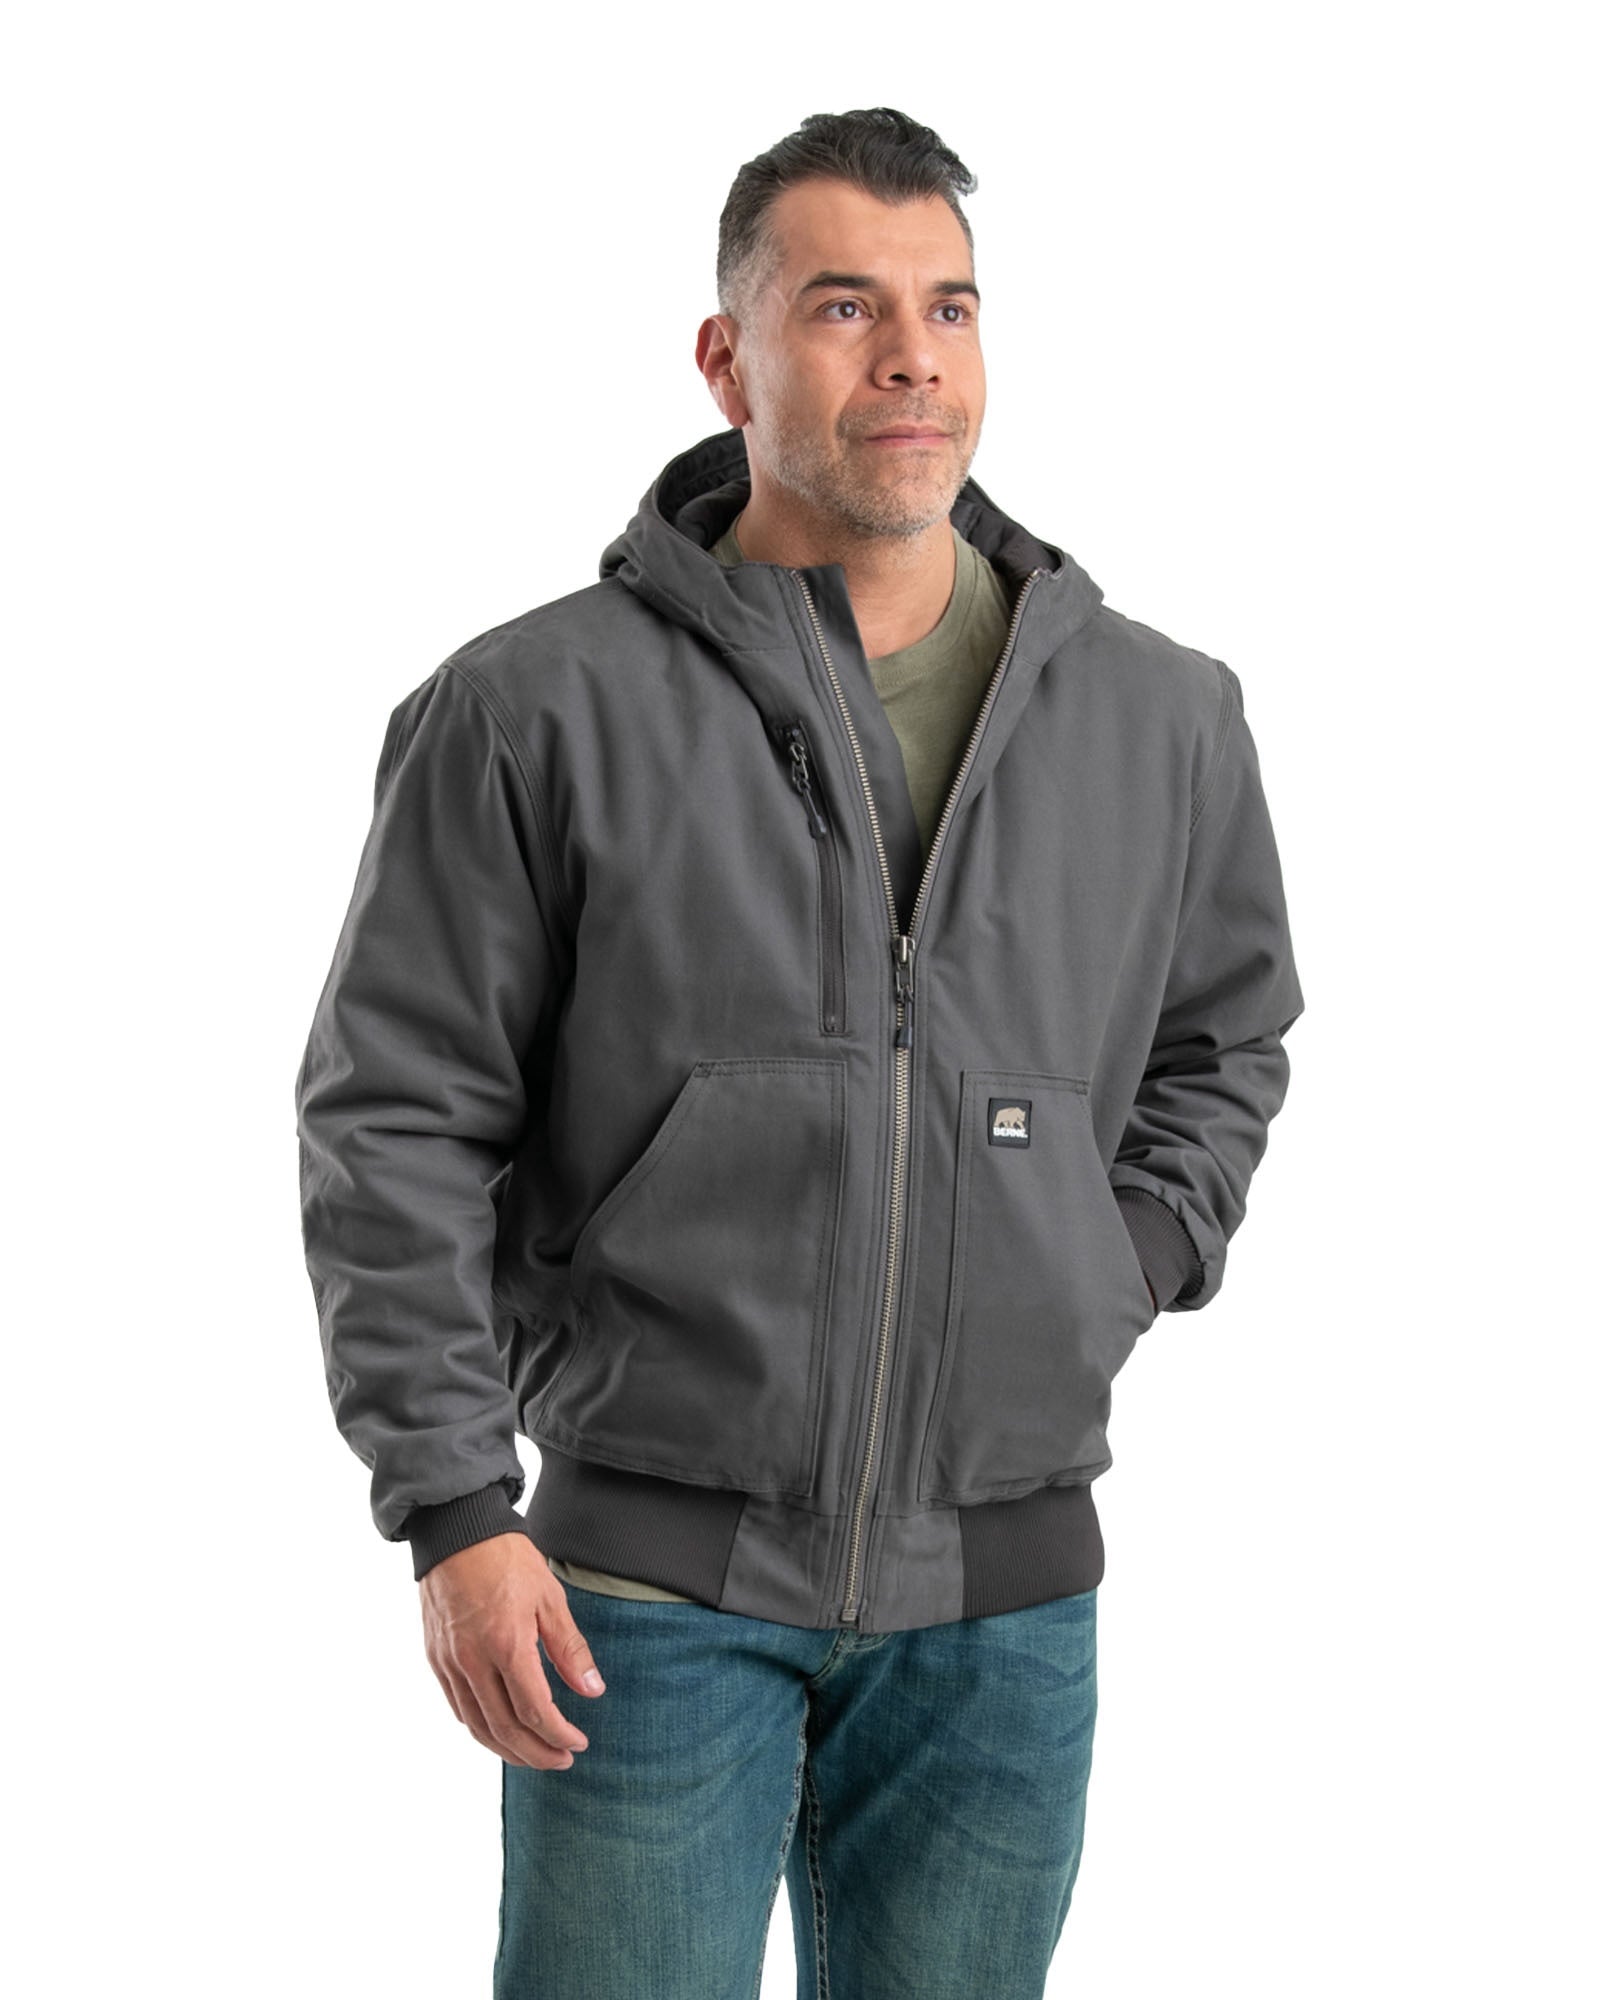 Icecap Insulated Hooded Work Jacket